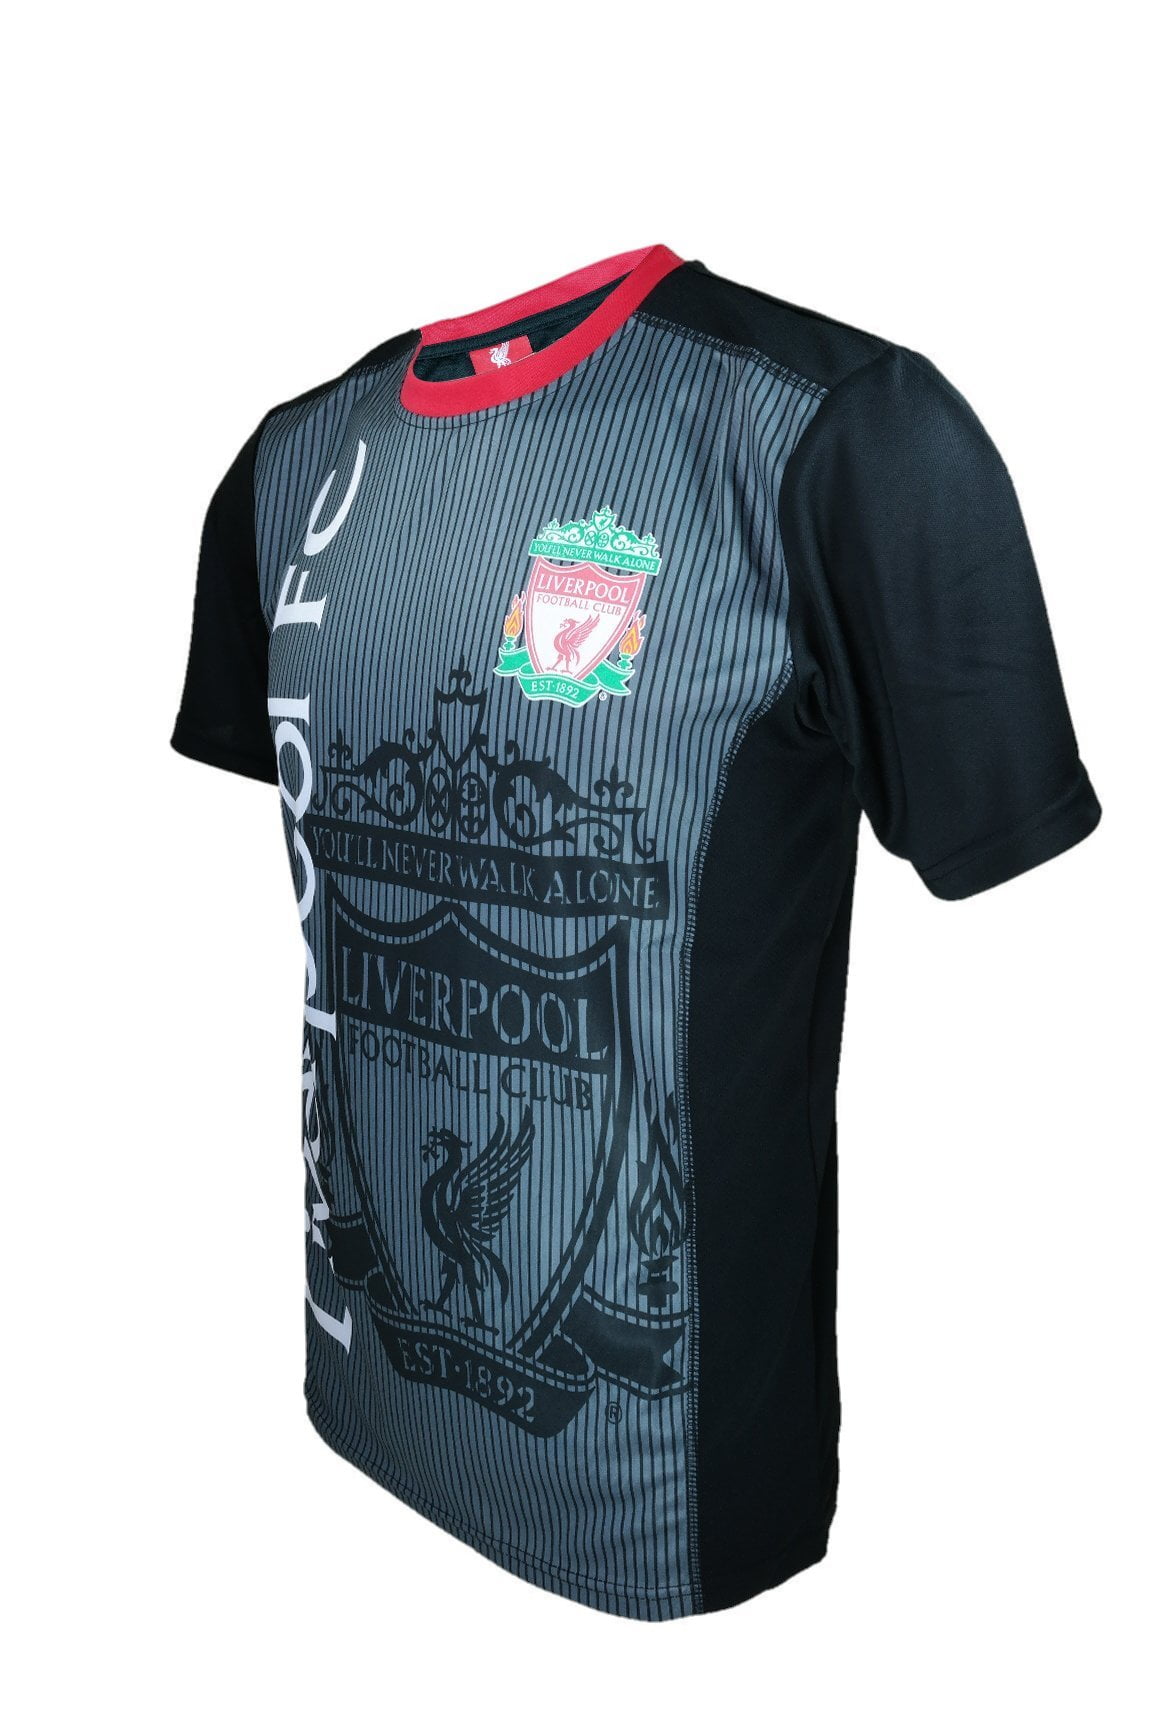 Soccer Official Adult Soccer Training Jersey J018 L Liverpool F.C 